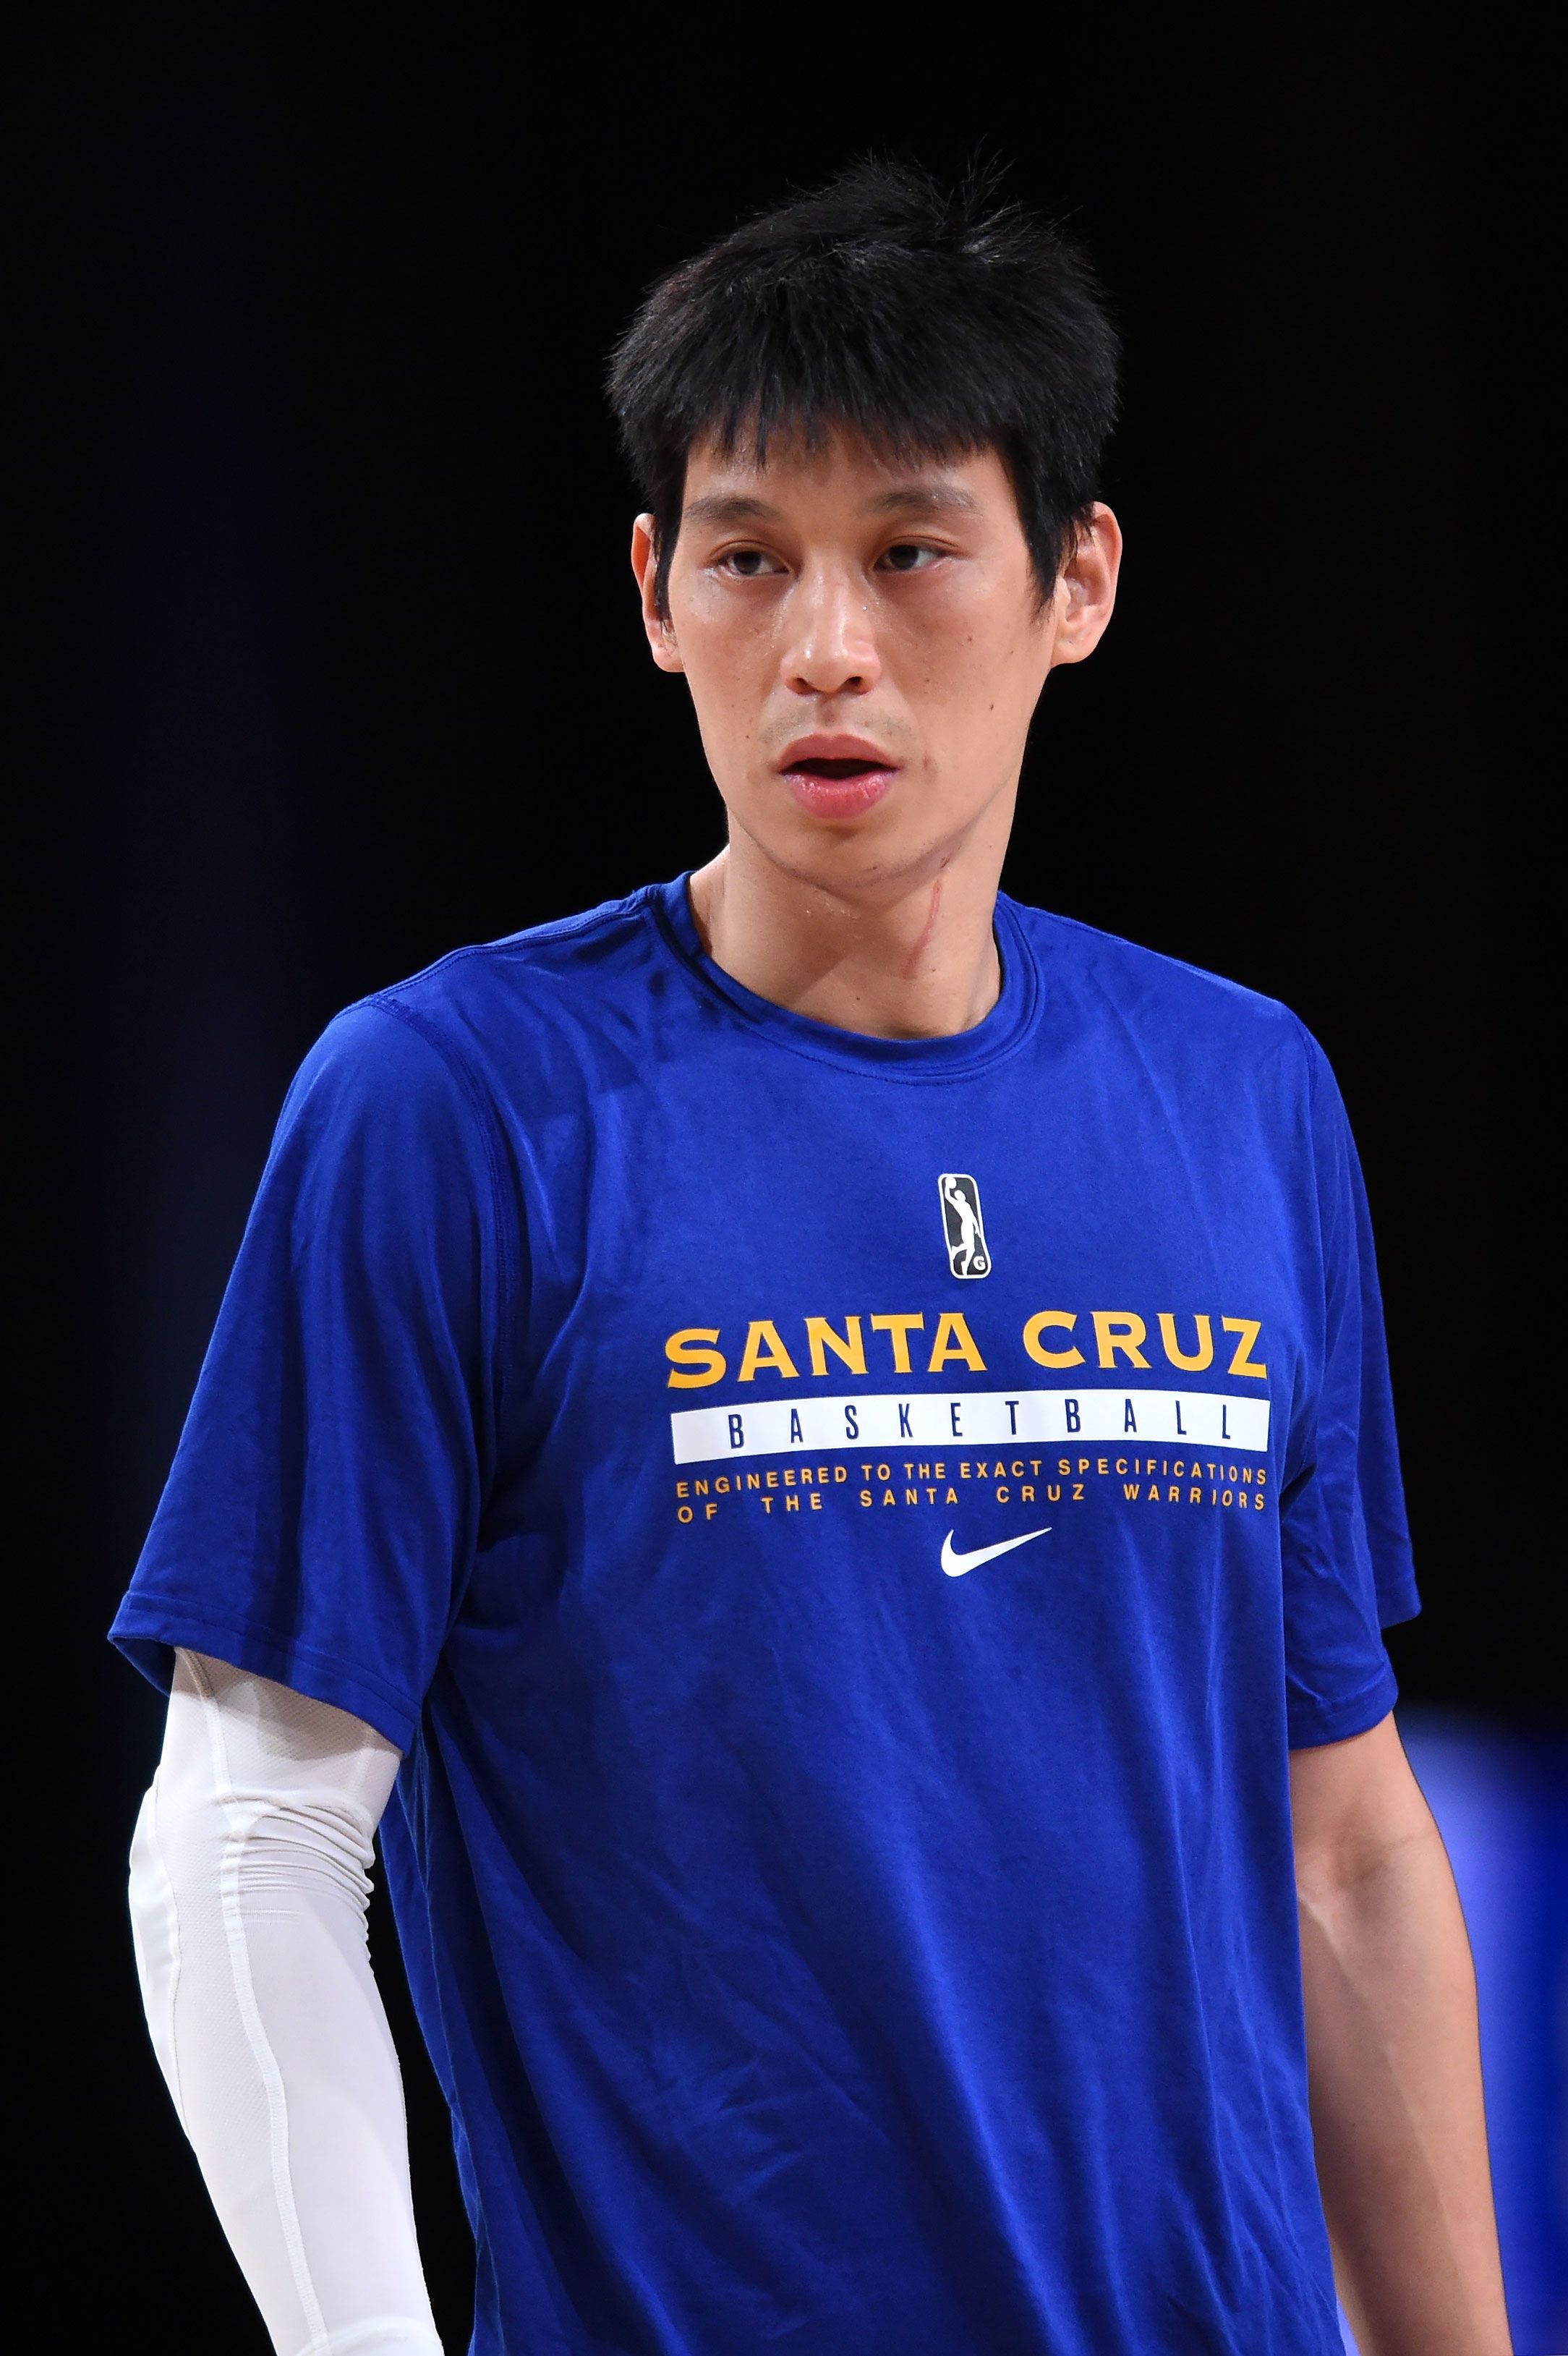 SC Warriors player Jeremy Lin releases response to hate crimes against  Asian Americans – KION546